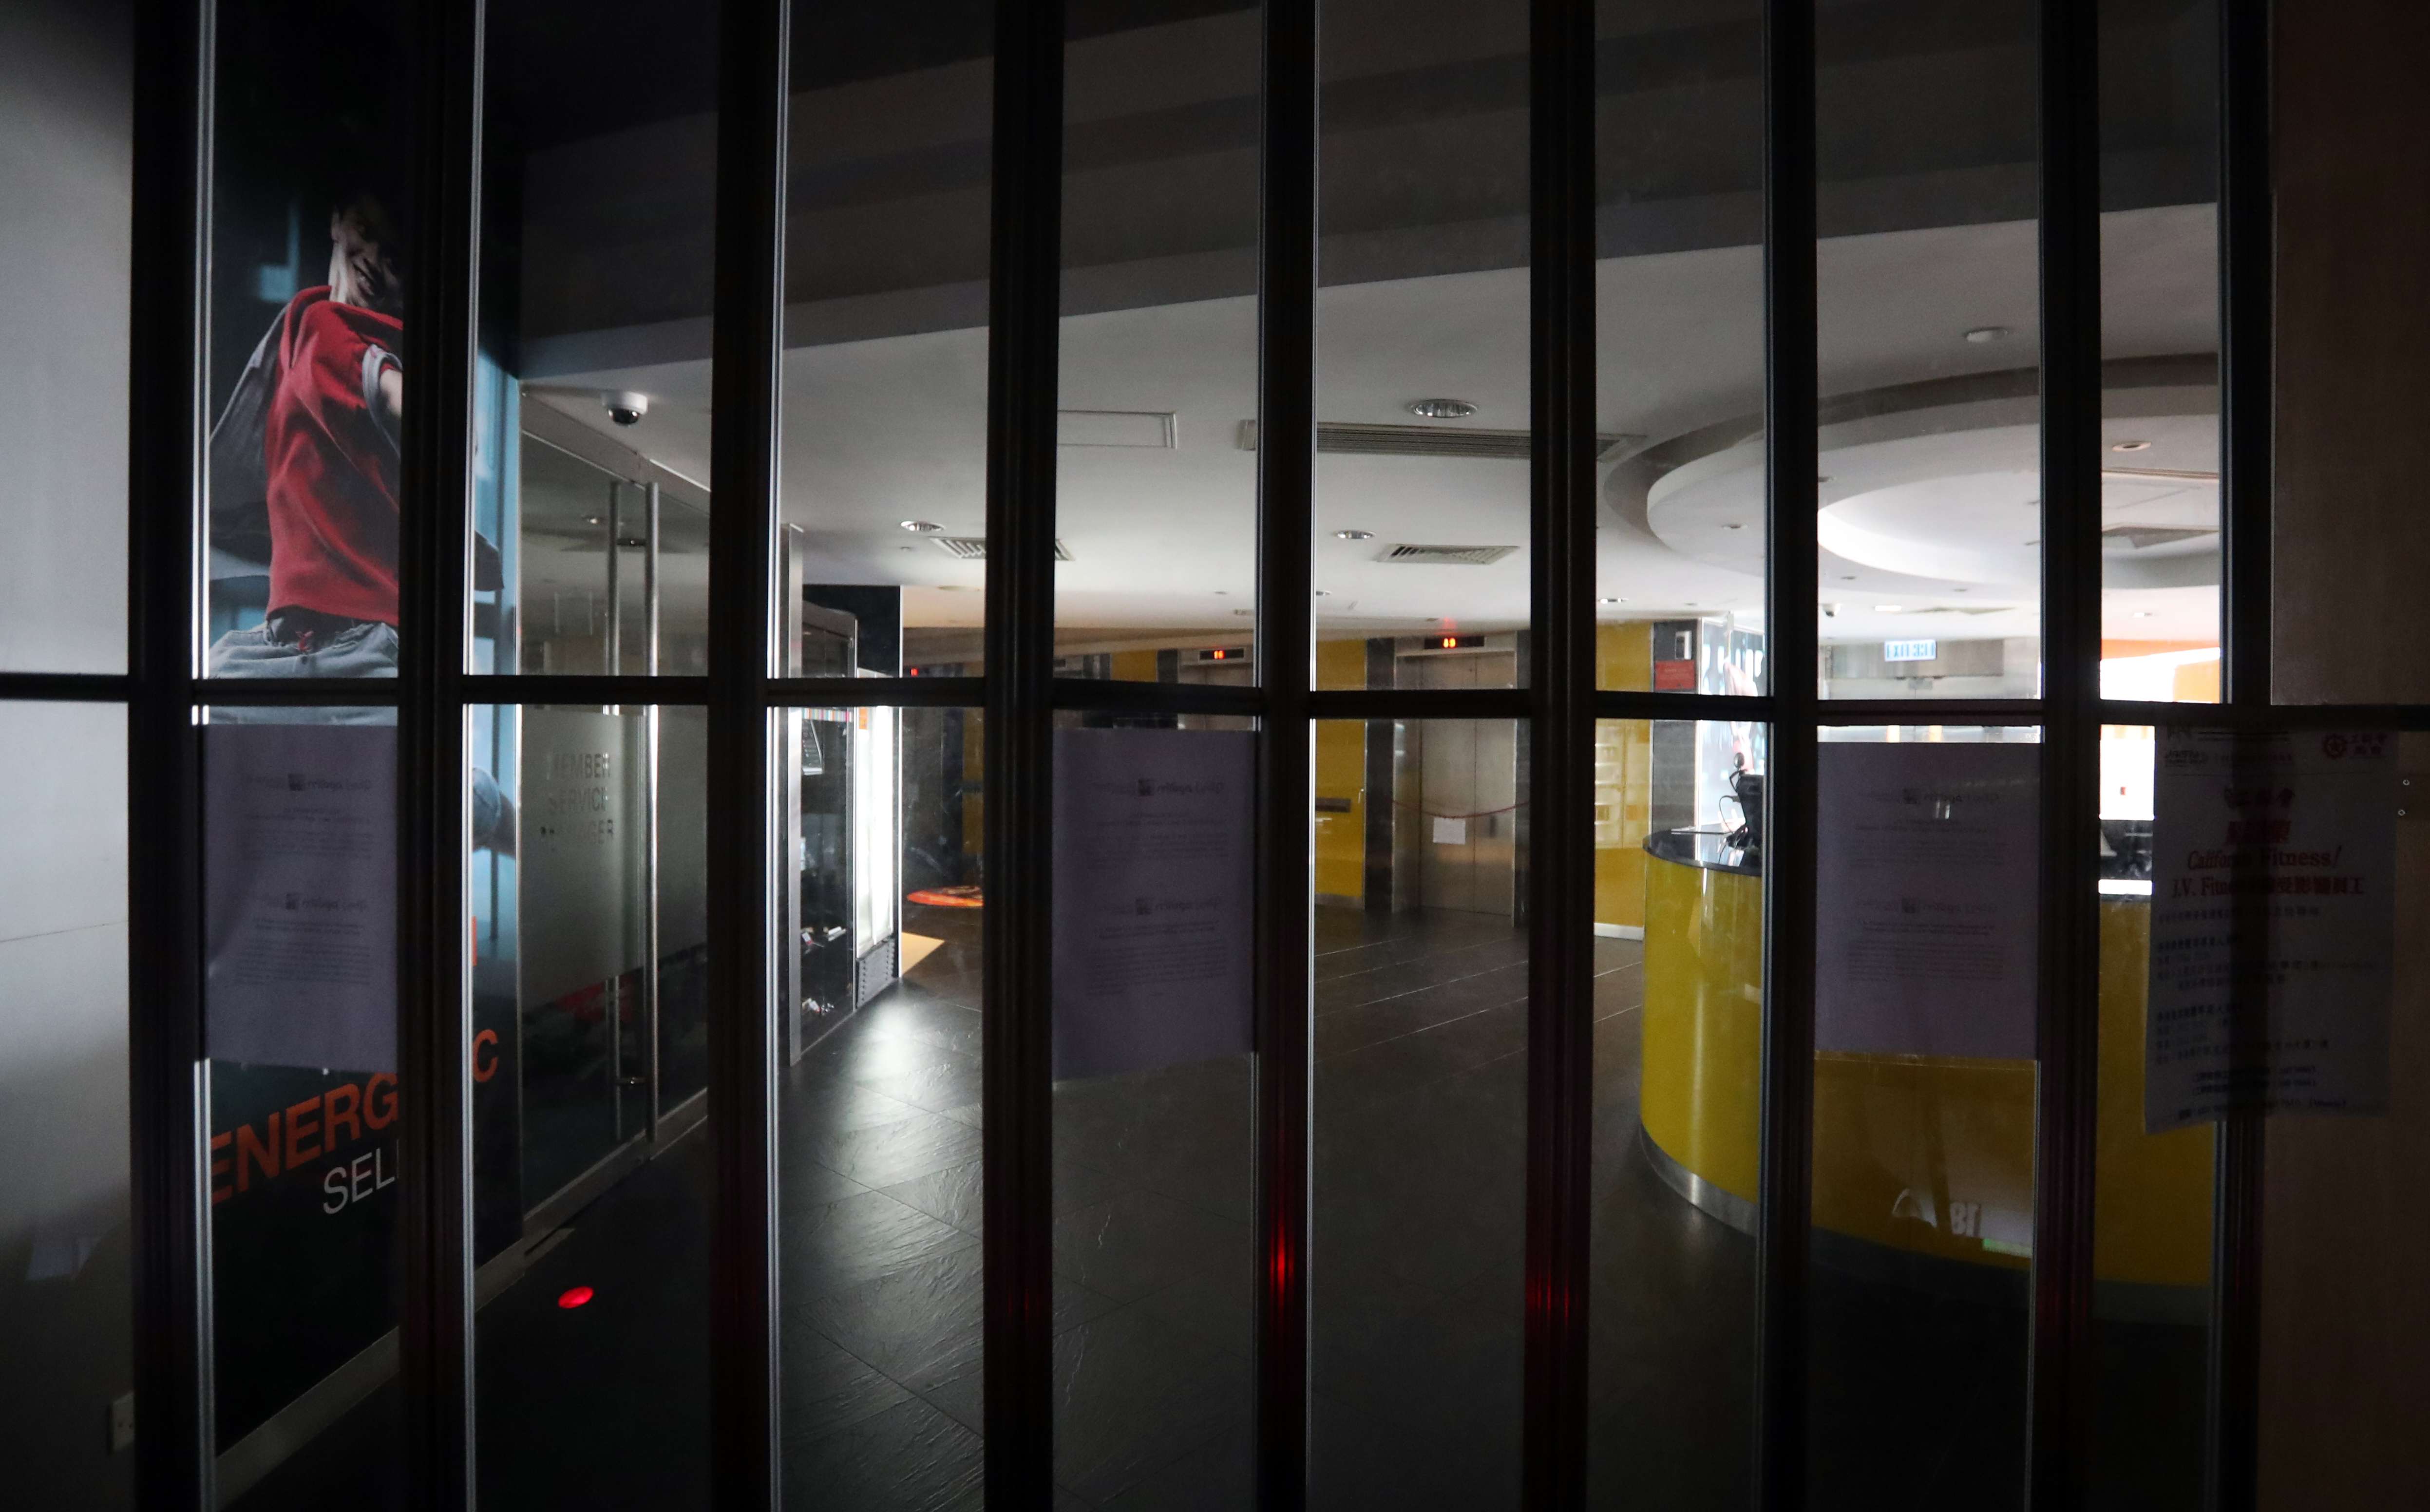 Like all the other branches, the California Fitness outlet in Kowloon Bay was closed on Tuesday. Photo: Edward Wong